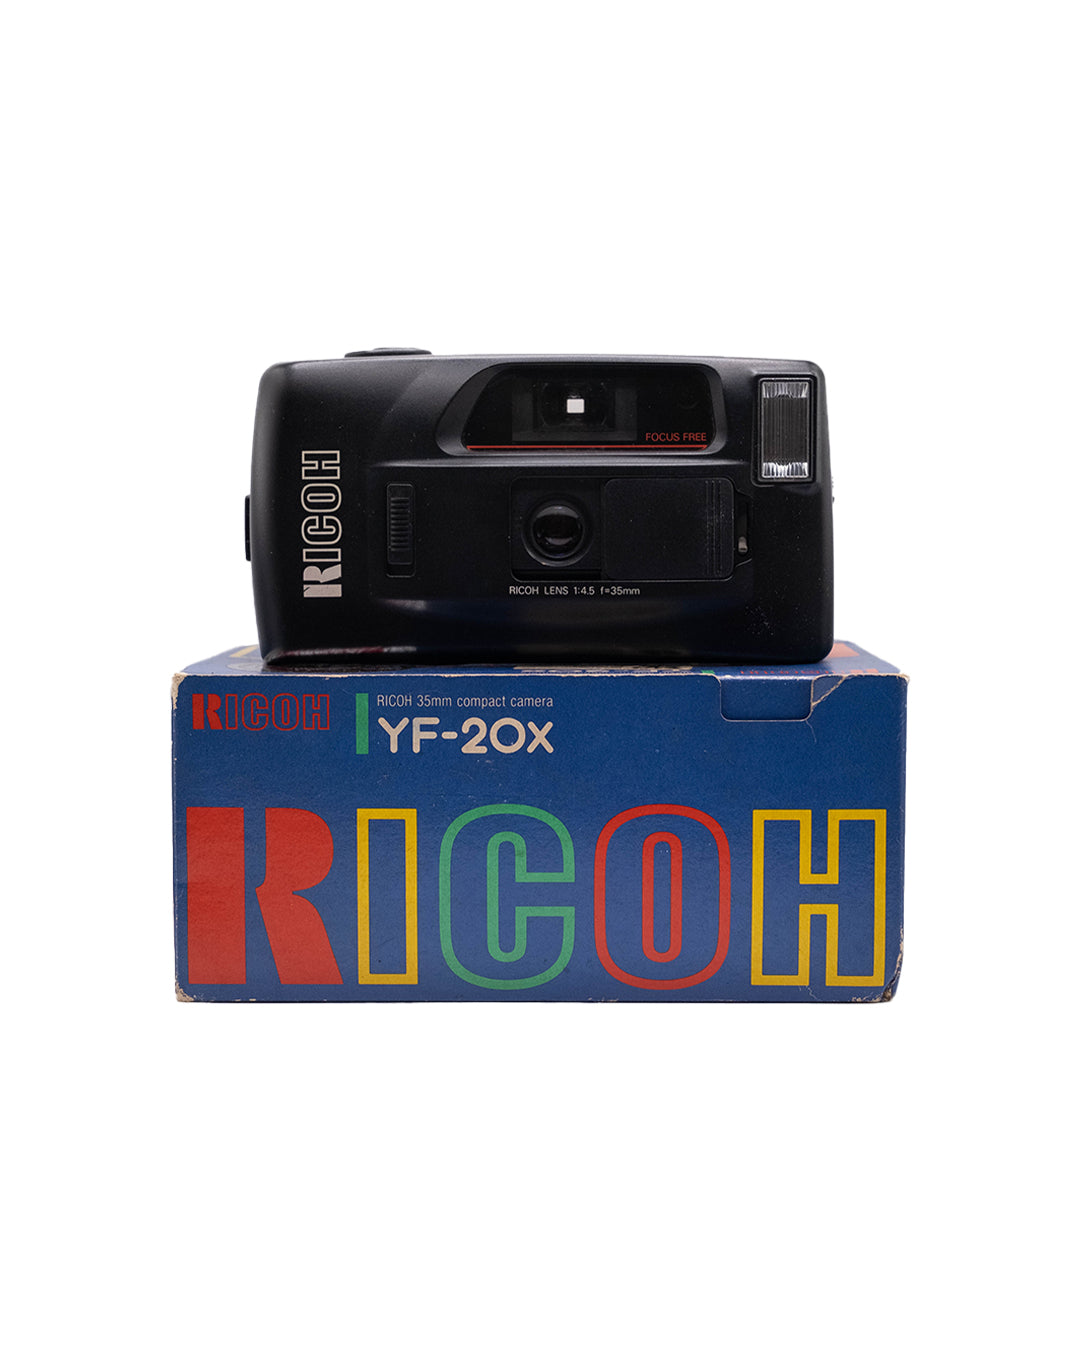 *NEW Ricoh YF-20x Point & Shoot Camera with 35mm lens